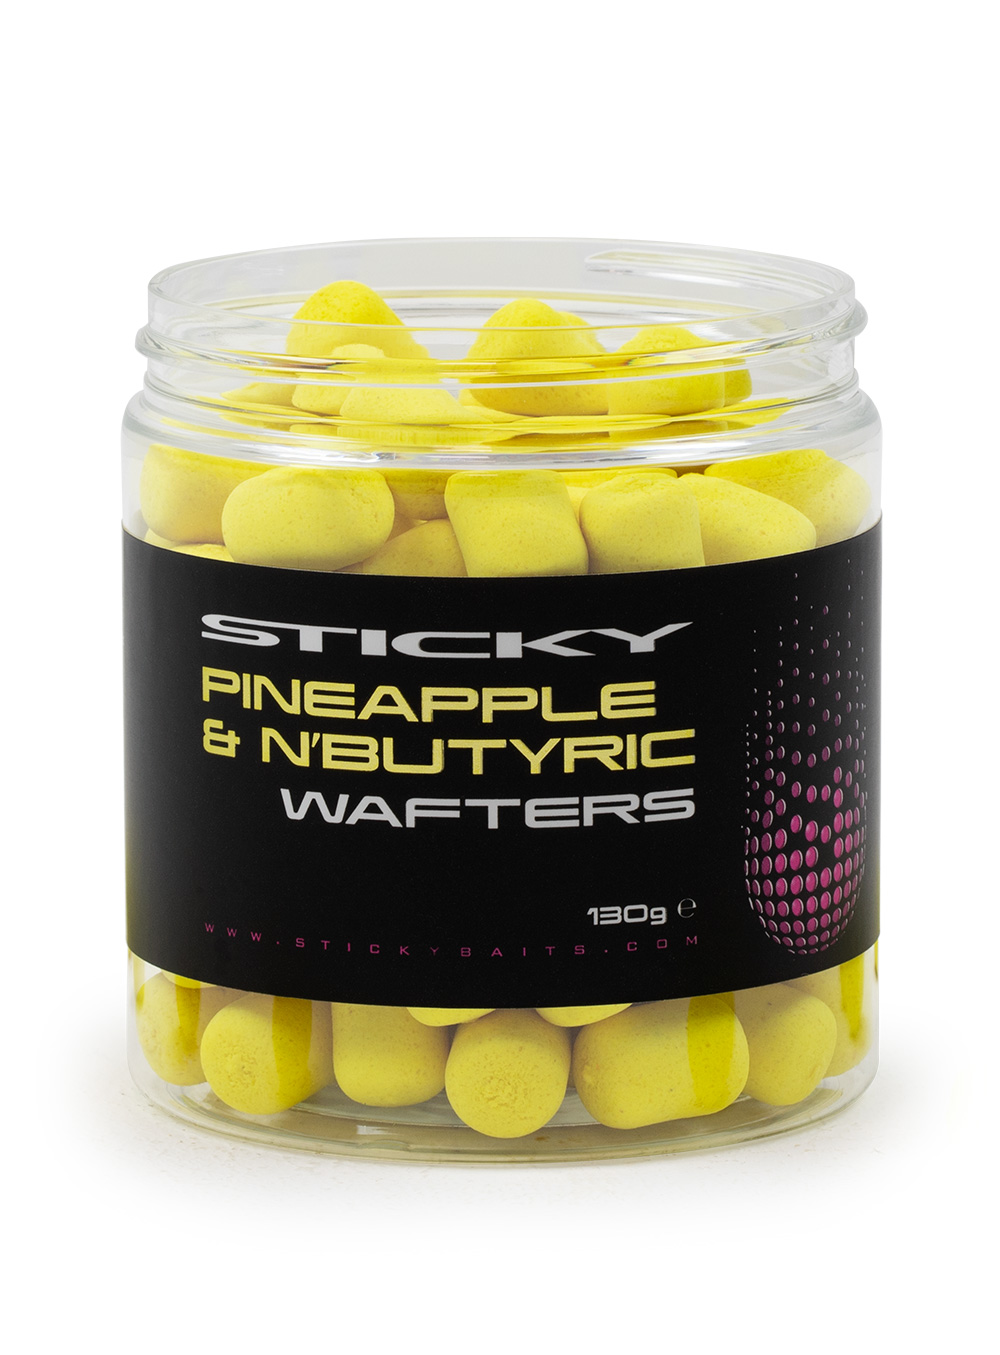 Sticky Baits - Products - Pineapple & N'Butyric Wafters - Carp Fishing Bait